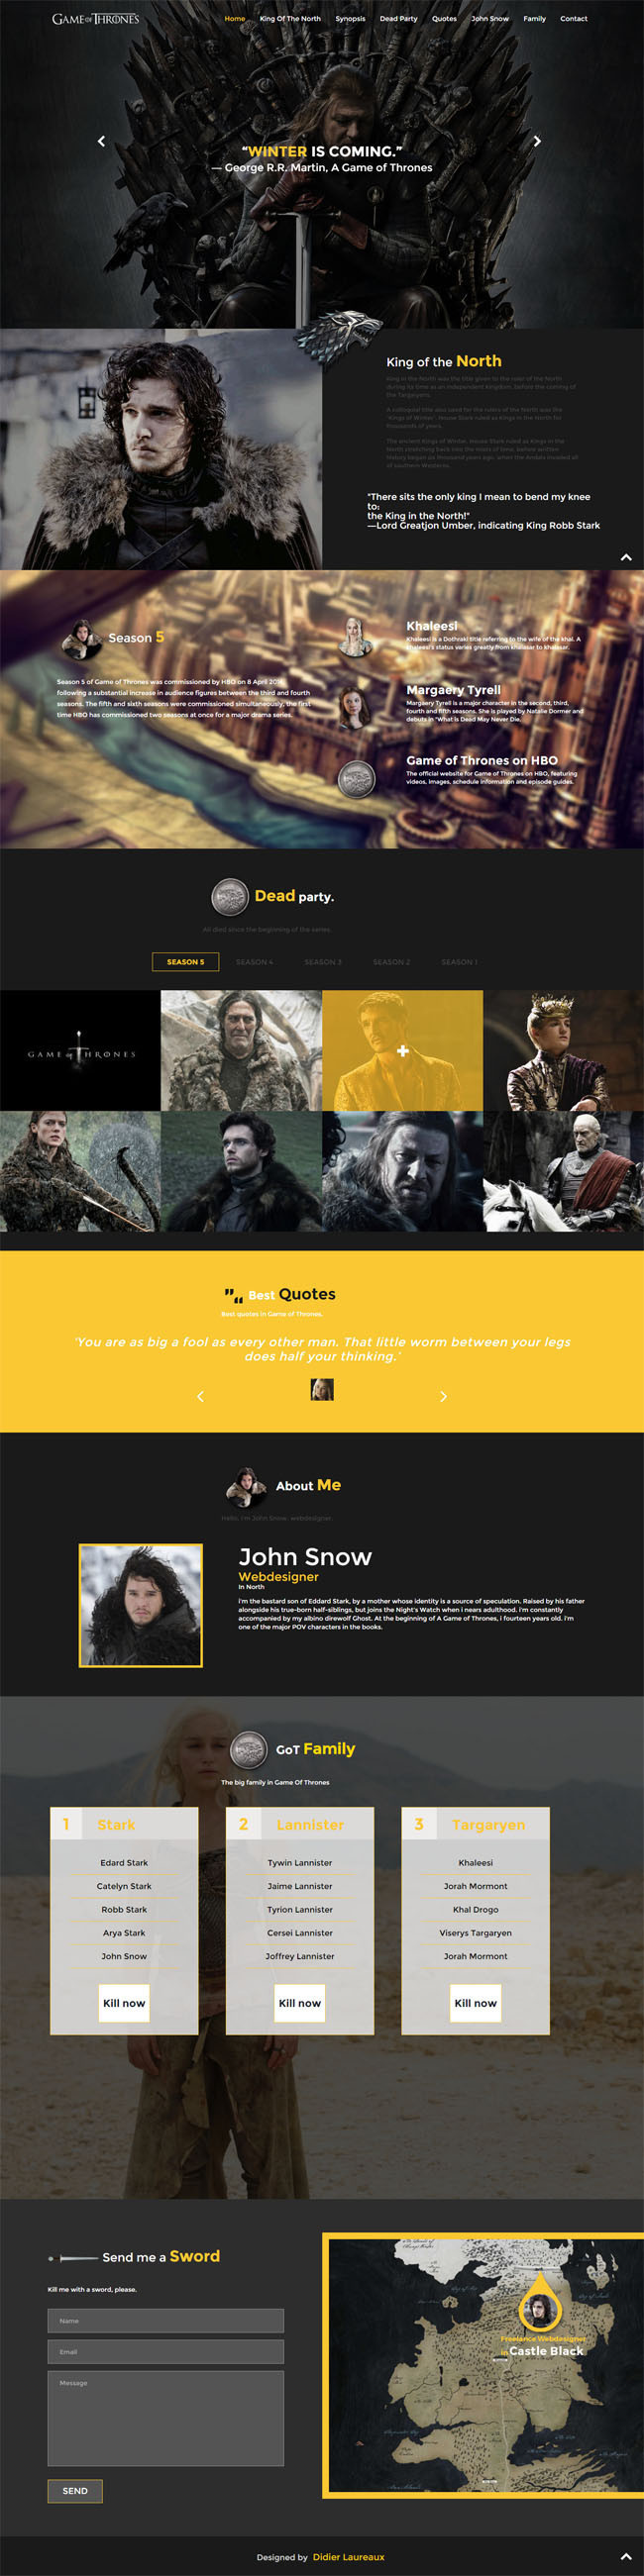 Game Of Thrones Template from dspncdn.com